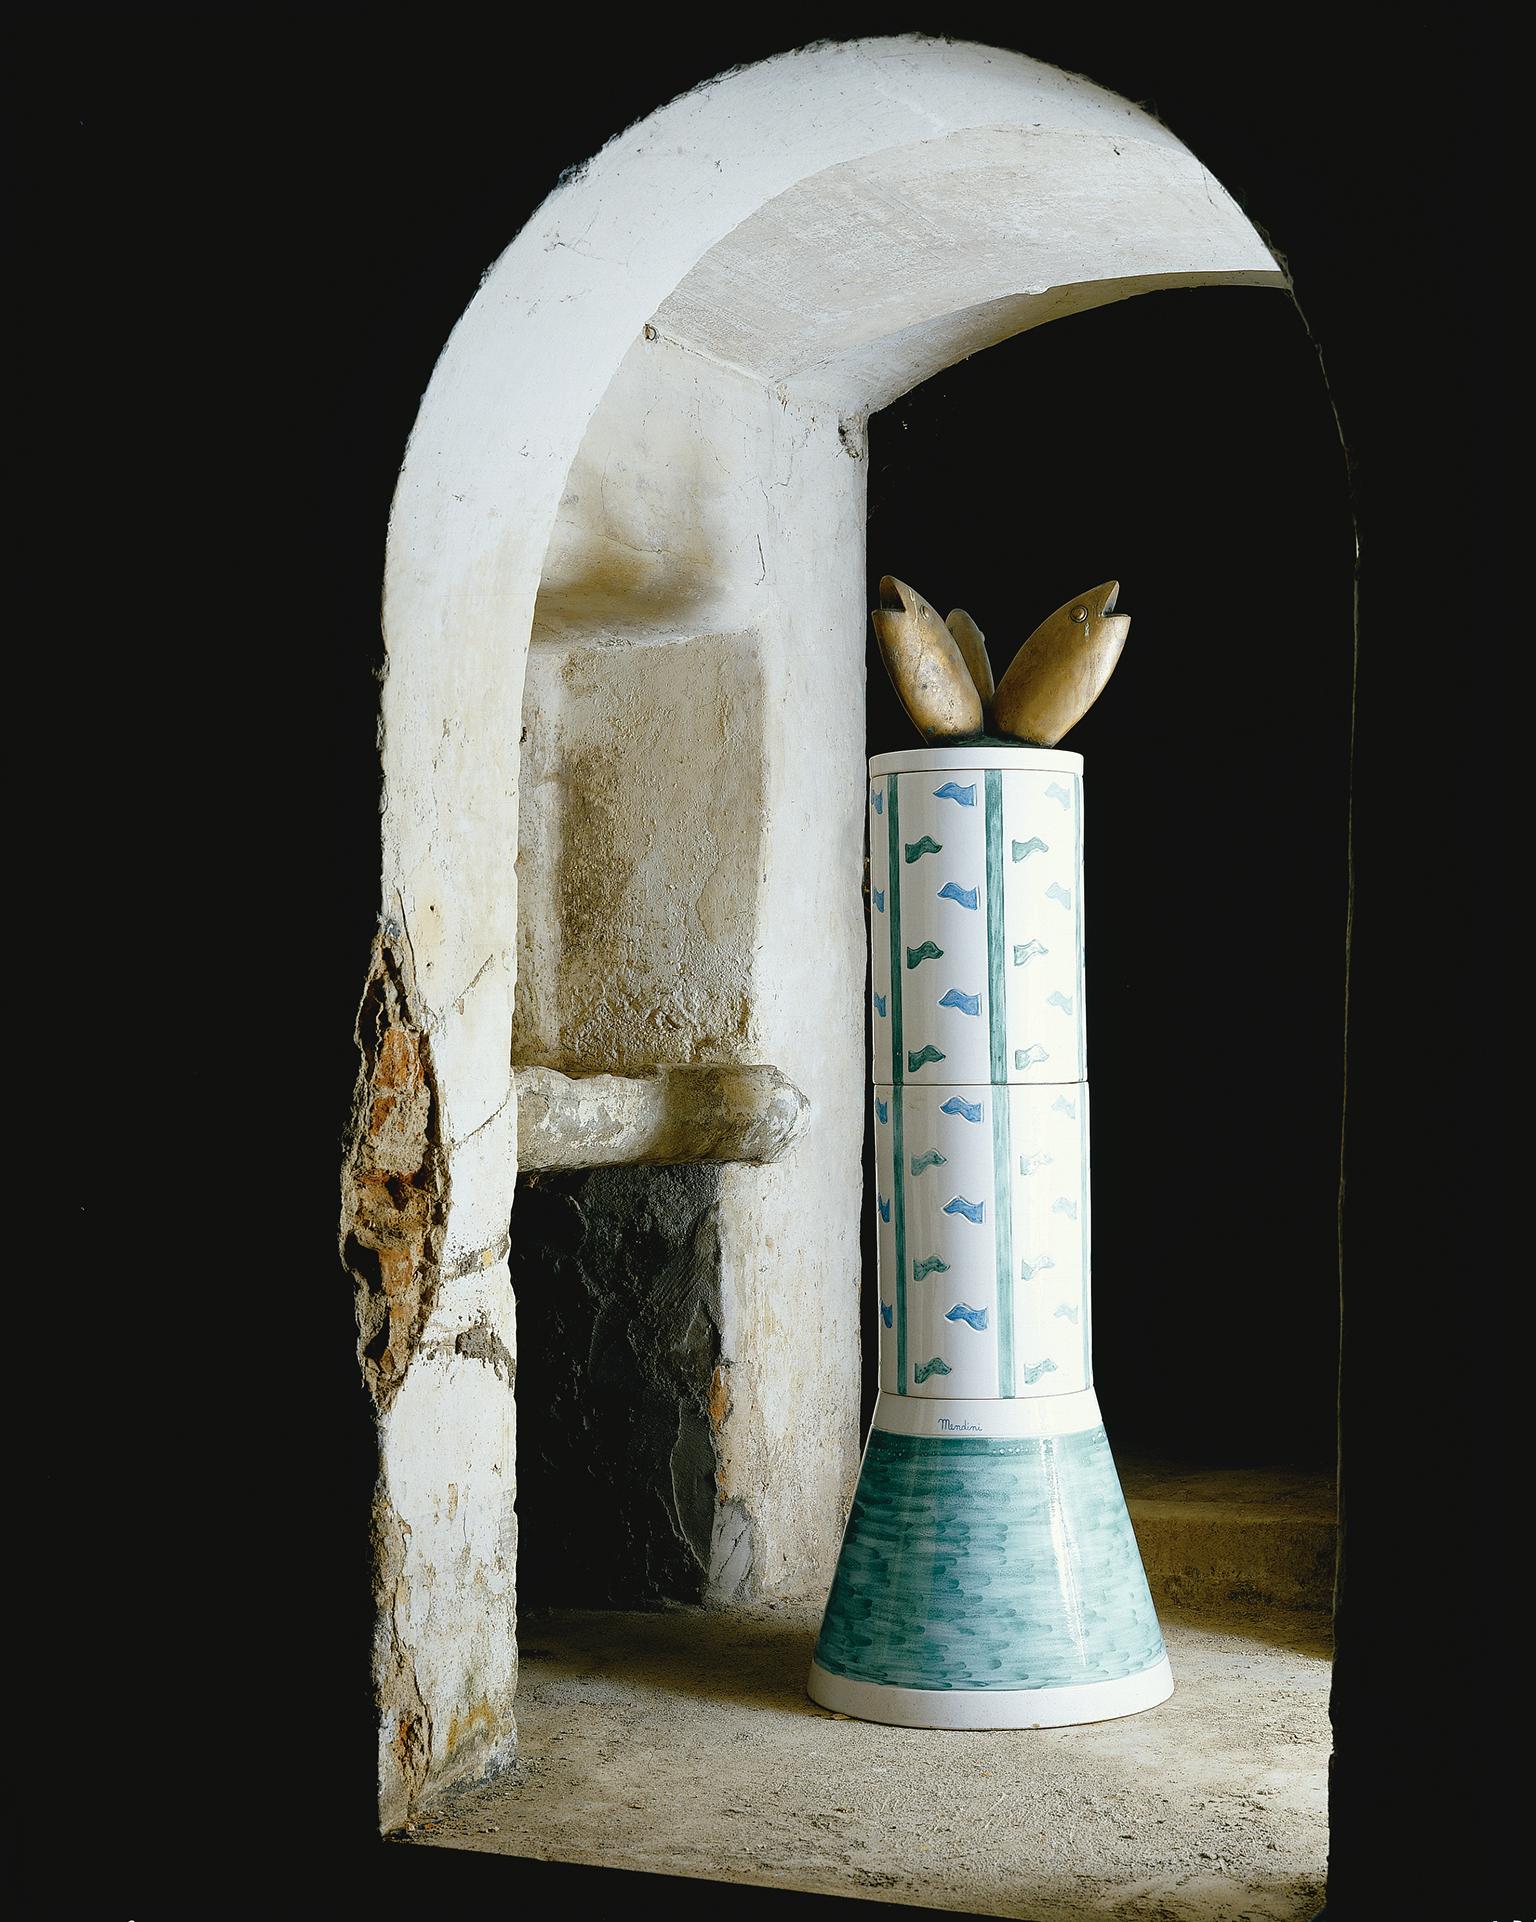 Limited edition of 99 numbered and signed copies of the Column composed by 3 elements, base in polychrome ceramic, 24 white grés tiles with decorations and a bronze fish sculpture.
This fountain is called “Le Colonne” because it is made of